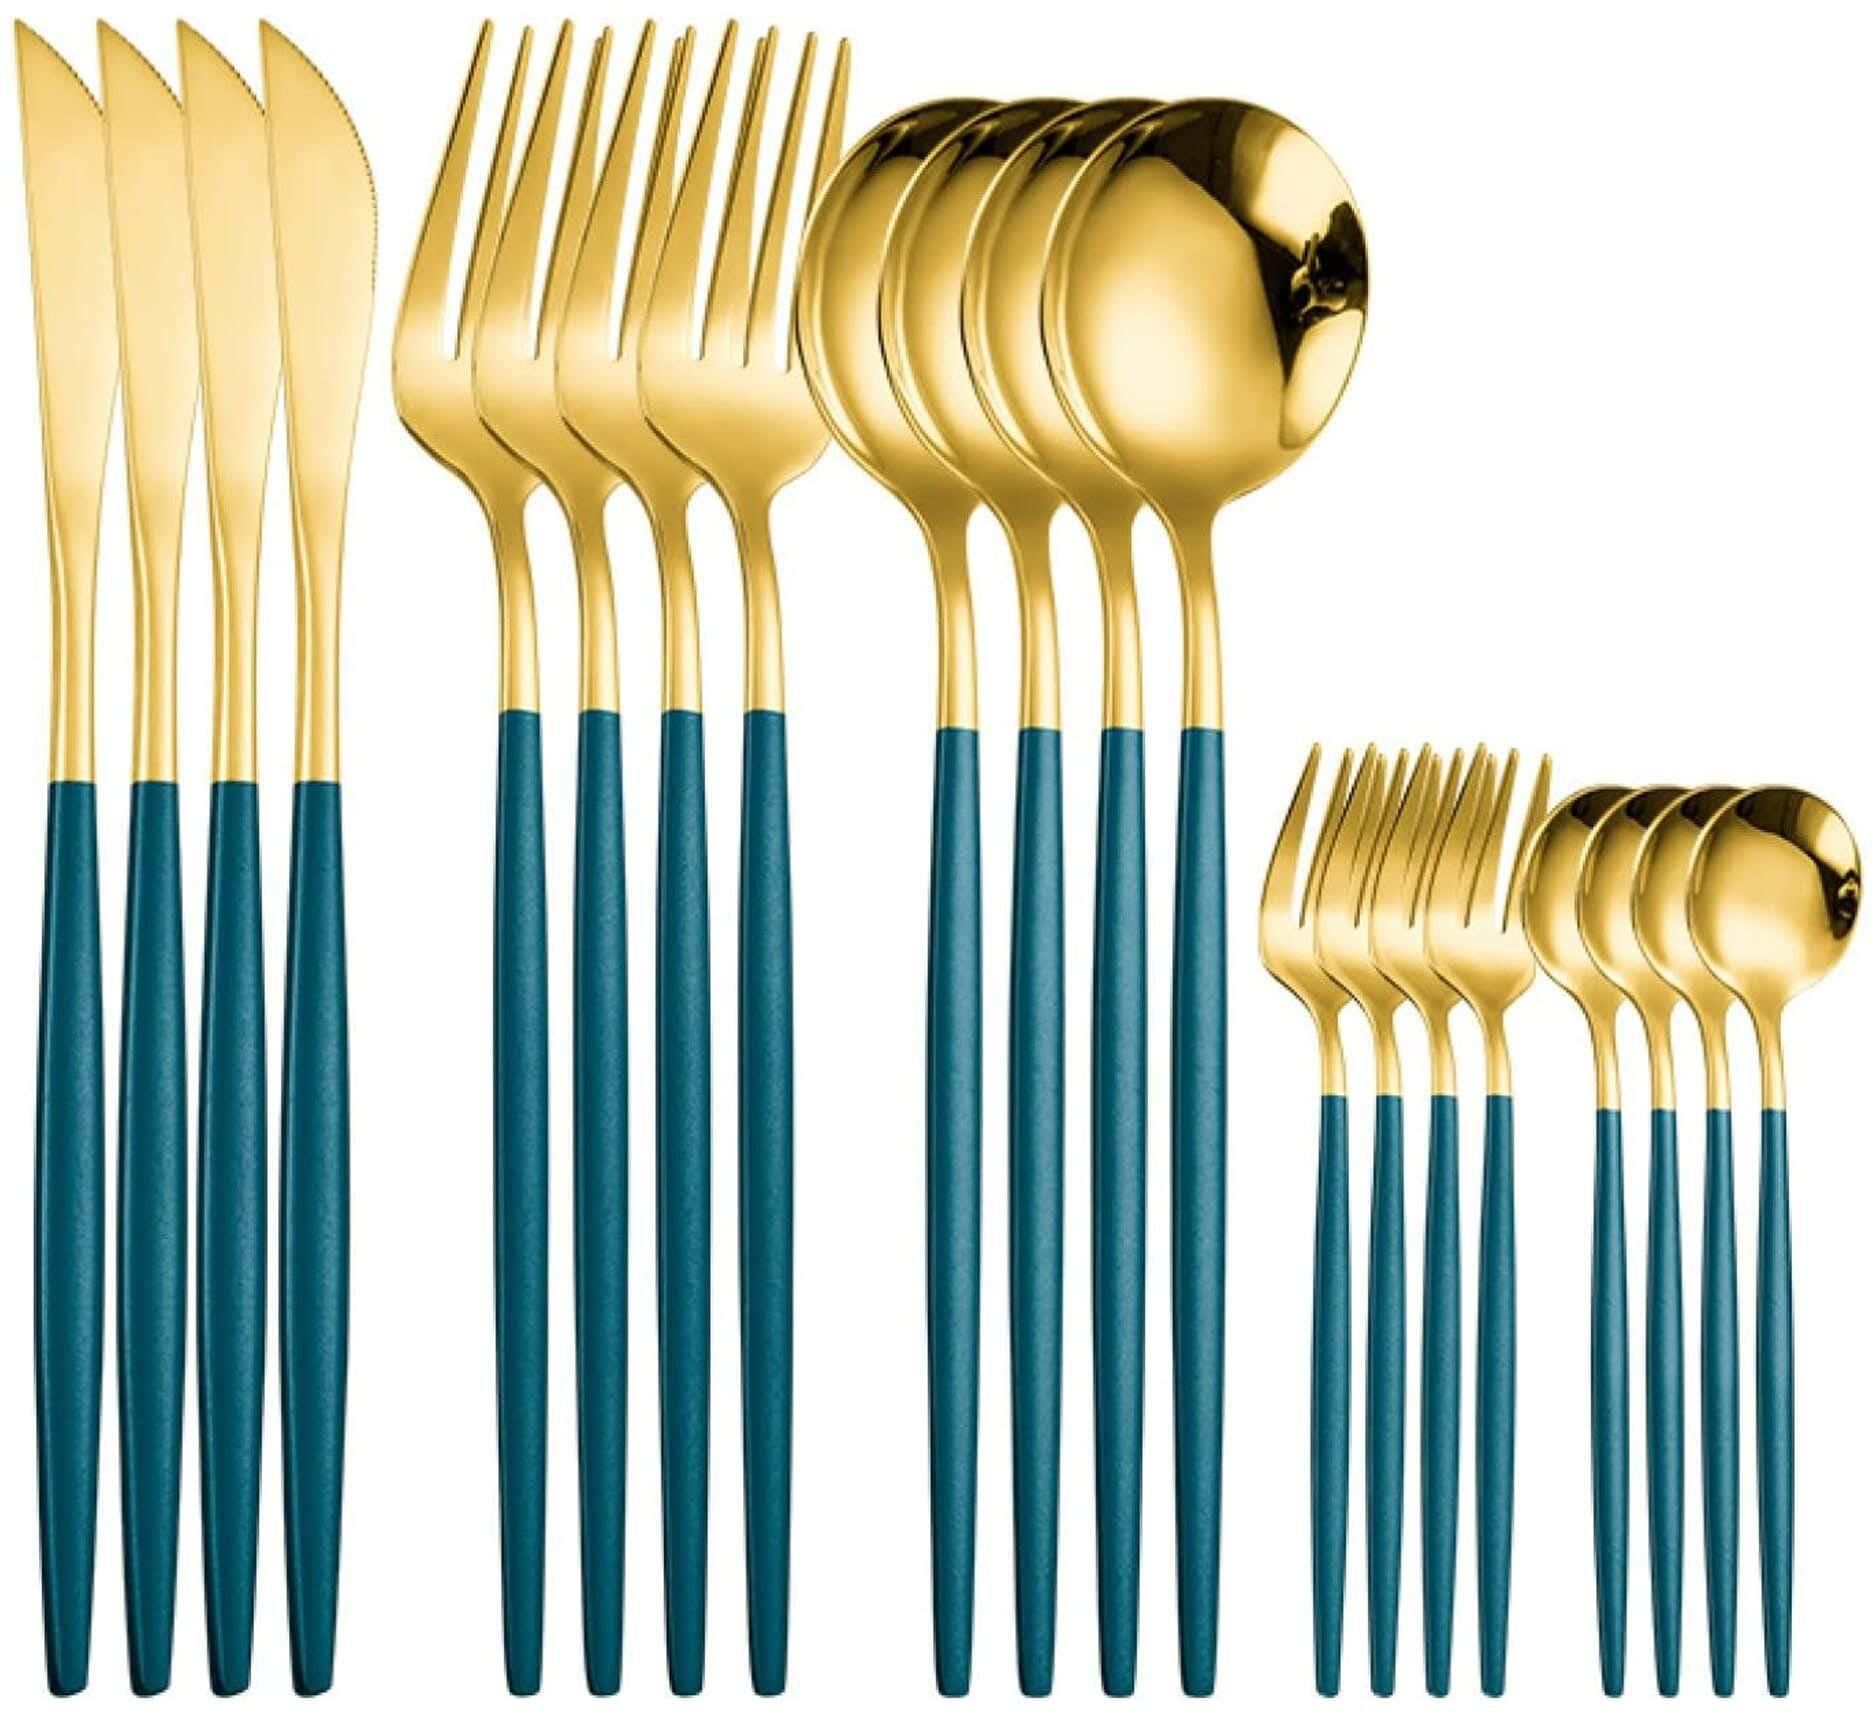 Get Stainless steel cutlery set, 30 pieces - Green Gold with best offers | Raneen.com